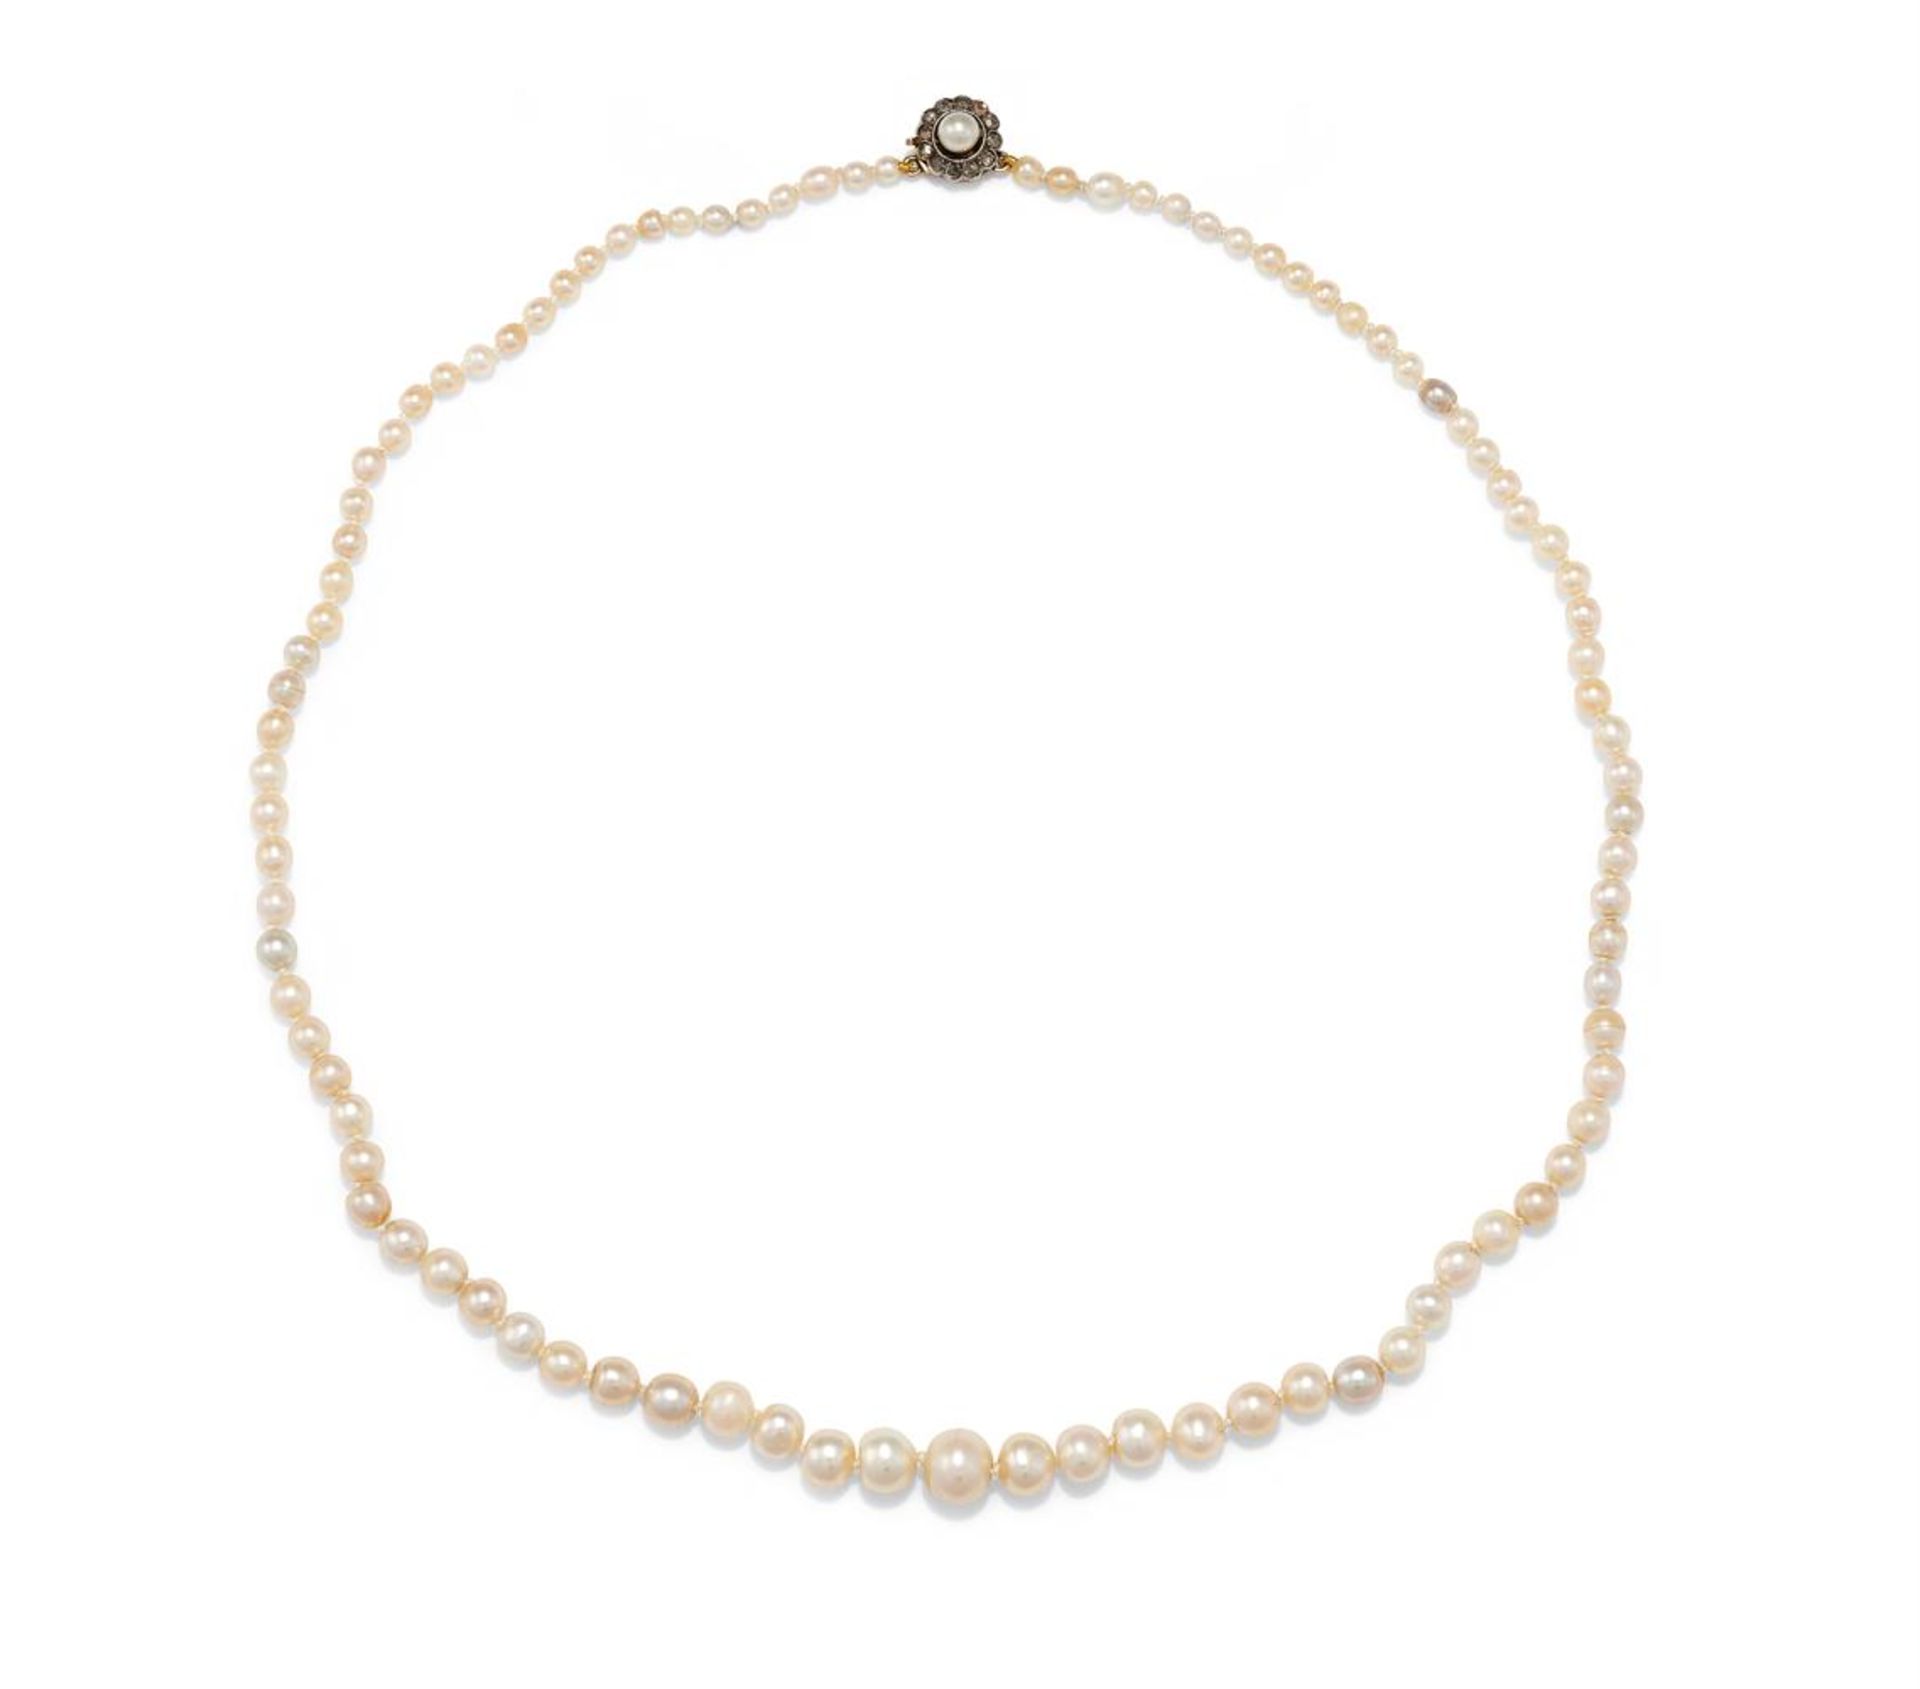 A NATURAL PEARL NECKLACE - Image 2 of 3